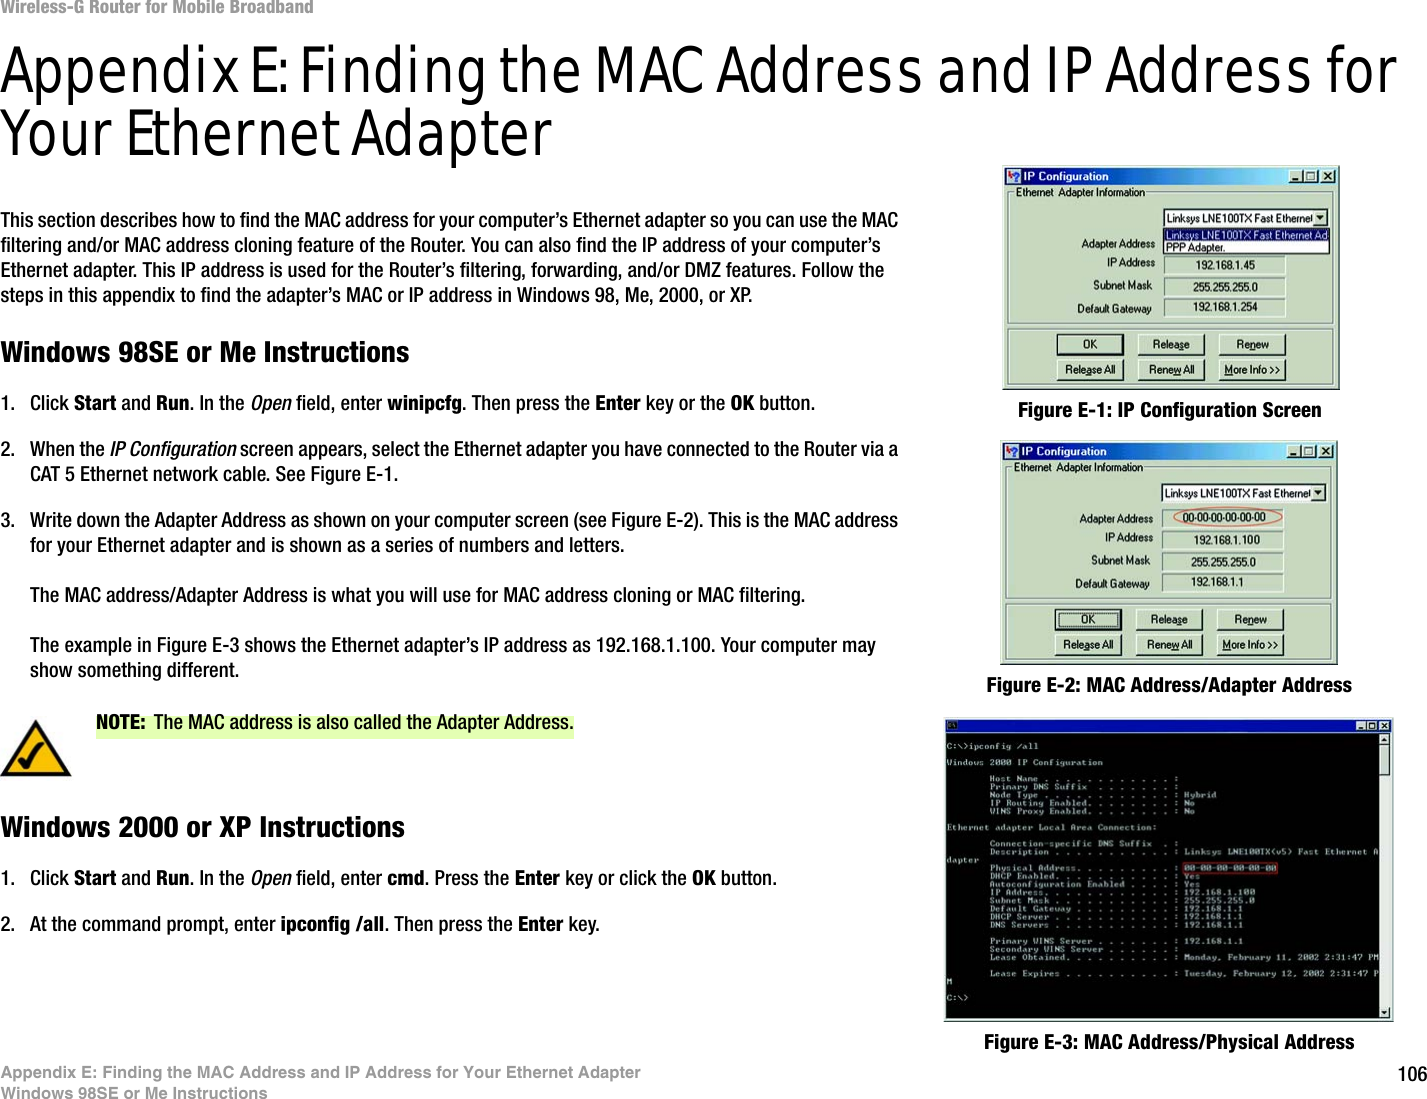 106Appendix E: Finding the MAC Address and IP Address for Your Ethernet AdapterWindows 98SE or Me InstructionsWireless-G Router for Mobile BroadbandAppendix E: Finding the MAC Address and IP Address for Your Ethernet AdapterThis section describes how to find the MAC address for your computer’s Ethernet adapter so you can use the MAC filtering and/or MAC address cloning feature of the Router. You can also find the IP address of your computer’s Ethernet adapter. This IP address is used for the Router’s filtering, forwarding, and/or DMZ features. Follow the steps in this appendix to find the adapter’s MAC or IP address in Windows 98, Me, 2000, or XP.Windows 98SE or Me Instructions1. Click Start and Run. In the Open field, enter winipcfg. Then press the Enter key or the OK button. 2. When the IP Configuration screen appears, select the Ethernet adapter you have connected to the Router via a CAT 5 Ethernet network cable. See Figure E-1.3. Write down the Adapter Address as shown on your computer screen (see Figure E-2). This is the MAC address for your Ethernet adapter and is shown as a series of numbers and letters.The MAC address/Adapter Address is what you will use for MAC address cloning or MAC filtering.The example in Figure E-3 shows the Ethernet adapter’s IP address as 192.168.1.100. Your computer may show something different.Windows 2000 or XP Instructions1. Click Start and Run. In the Open field, enter cmd. Press the Enter key or click the OK button.2. At the command prompt, enter ipconfig /all. Then press the Enter key.Figure E-2: MAC Address/Adapter AddressFigure E-1: IP Configuration ScreenNOTE: The MAC address is also called the Adapter Address.Figure E-3: MAC Address/Physical Address